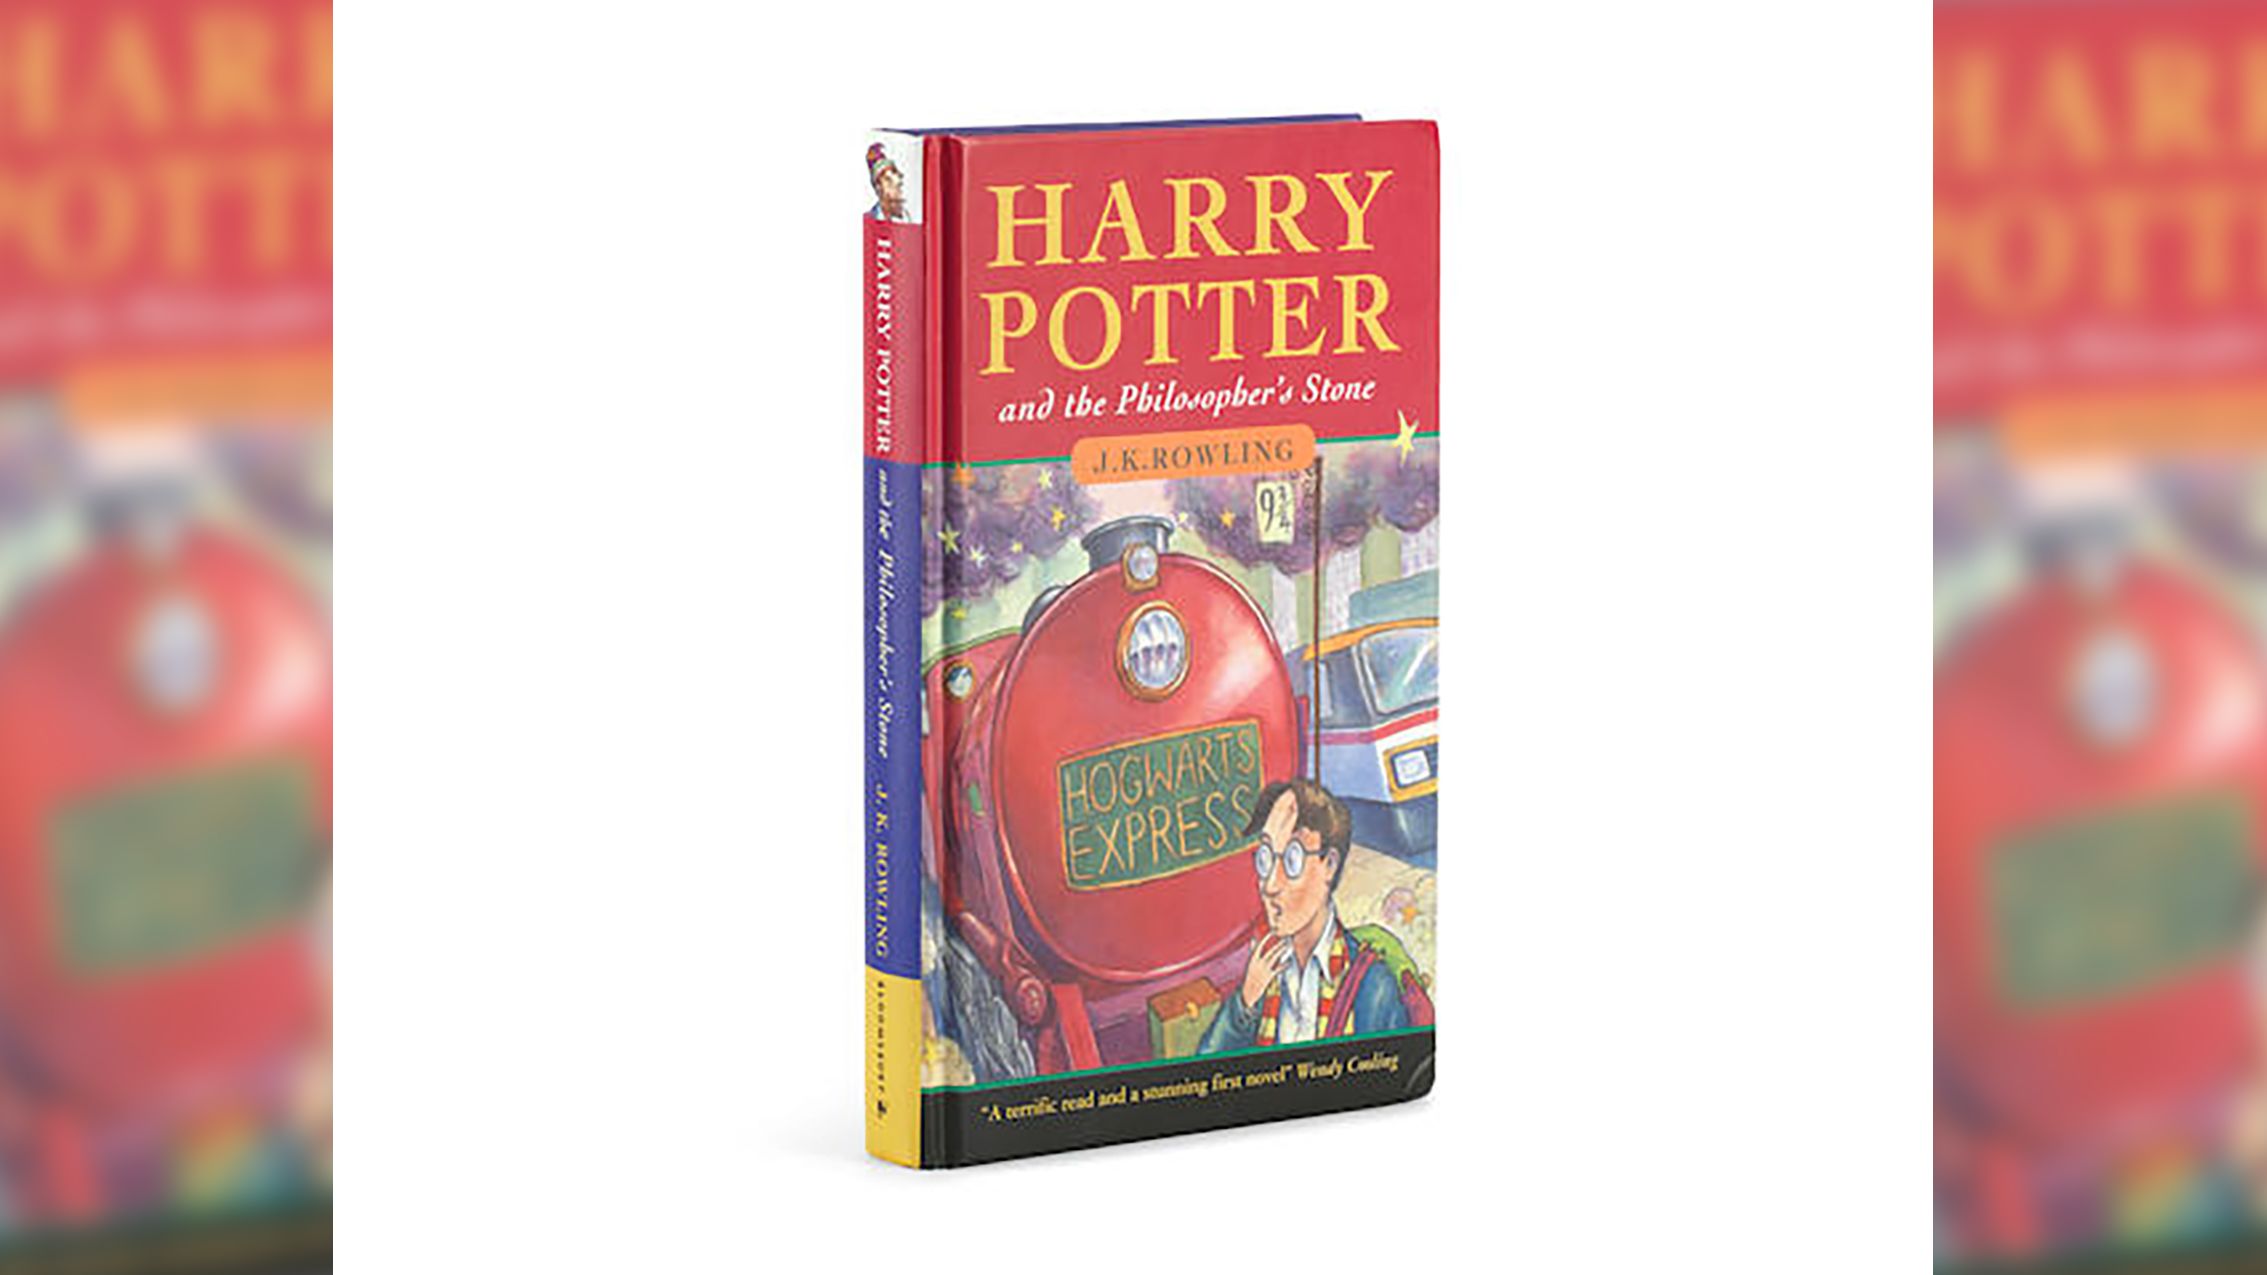 "Harry Potter and the Philosopher's Stone" is the first of seven novels in the series.